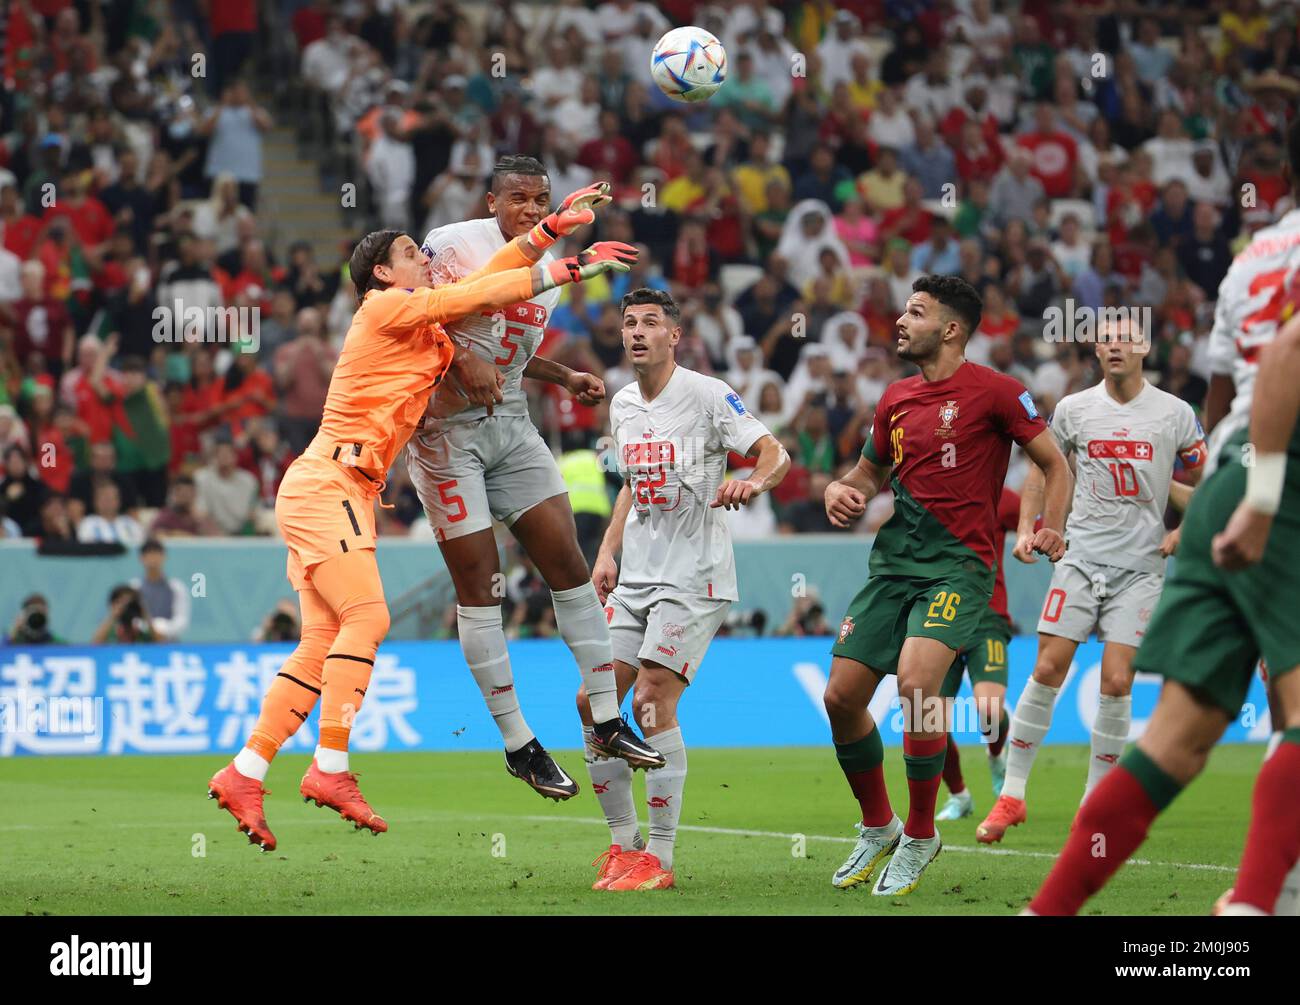 Lusail, Qatar. 6th Dec, 2022. Yann Sommer (1st L), goalkeeper of Switzerland, makes a save during the Round of 16 match between Portugal and Switzerland of the 2022 FIFA World Cup at Lusail Stadium in Lusail, Qatar, Dec. 6, 2022. Credit: Cao Can/Xinhua/Alamy Live News Stock Photo